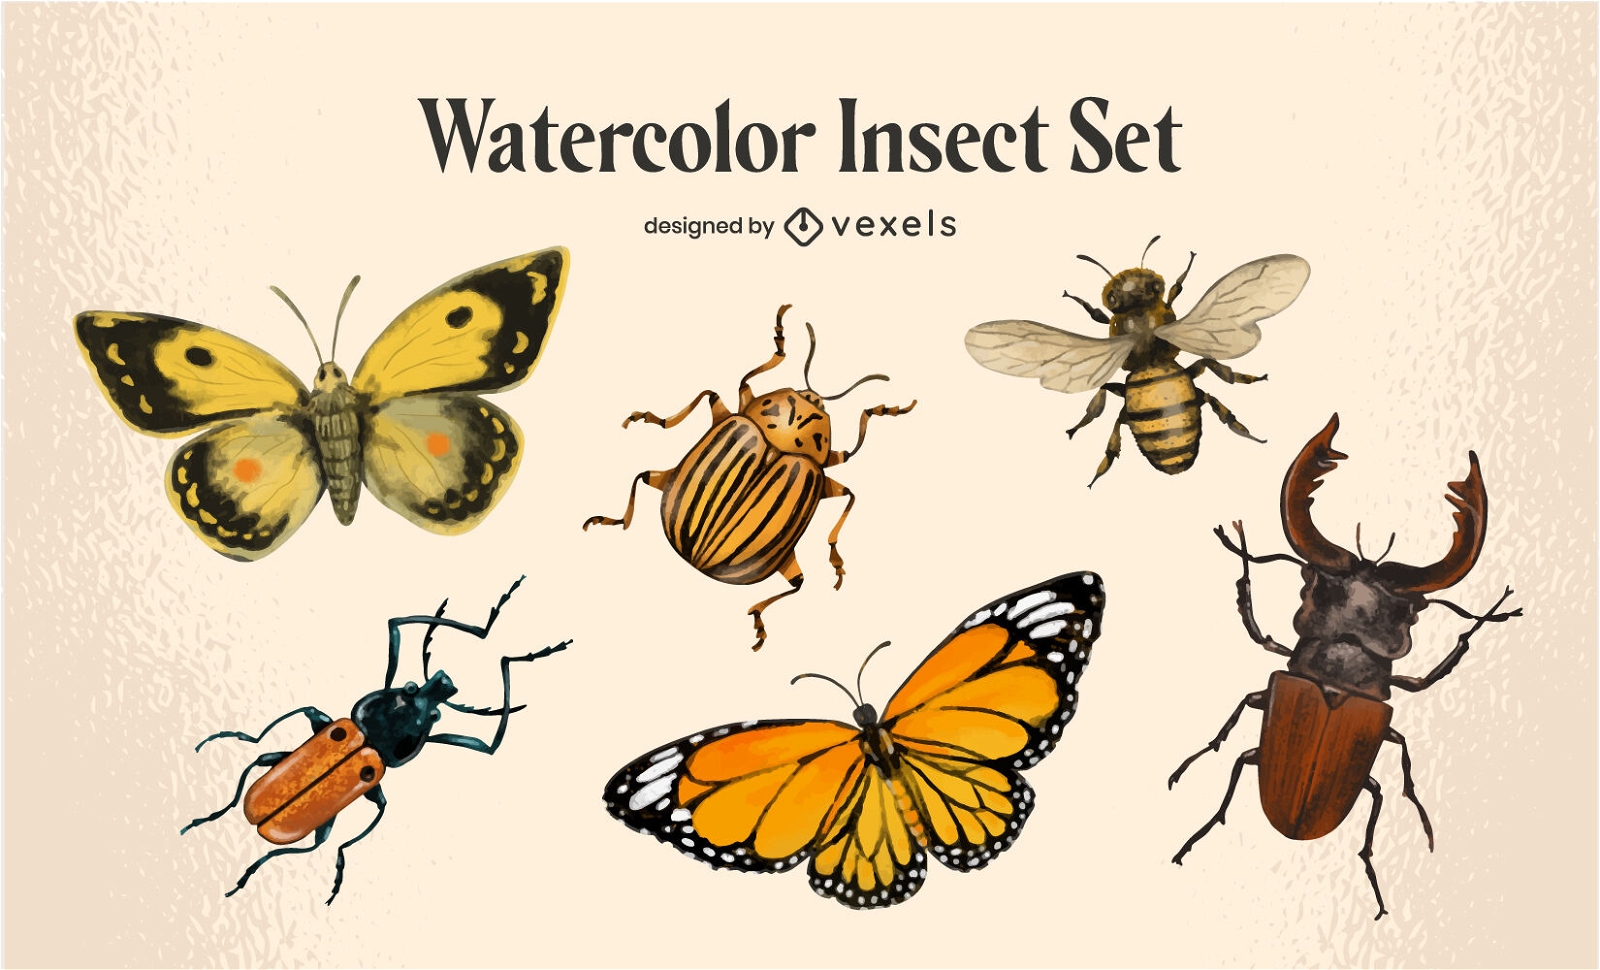 Watercolor multiple insect set